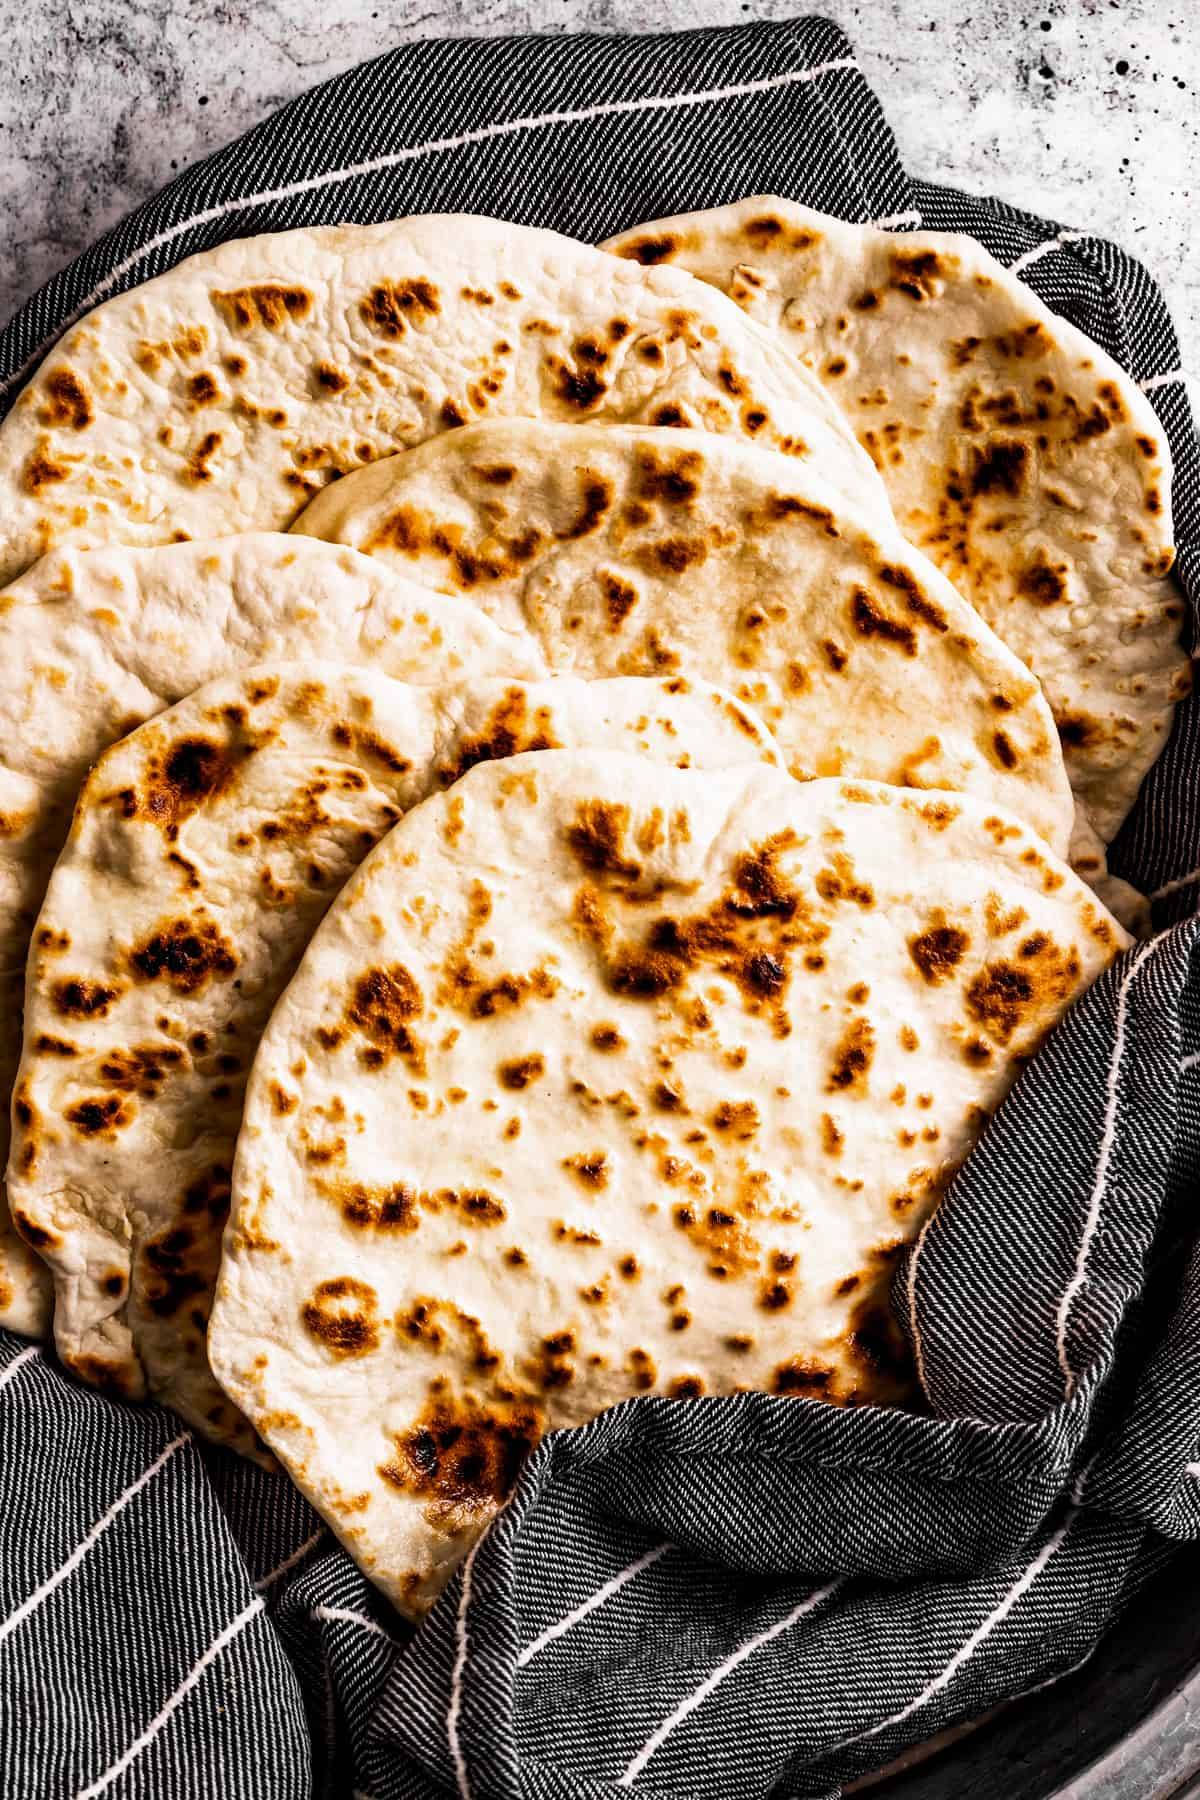 lavash armenian flatbread wrapped in a gray kitchen towel.